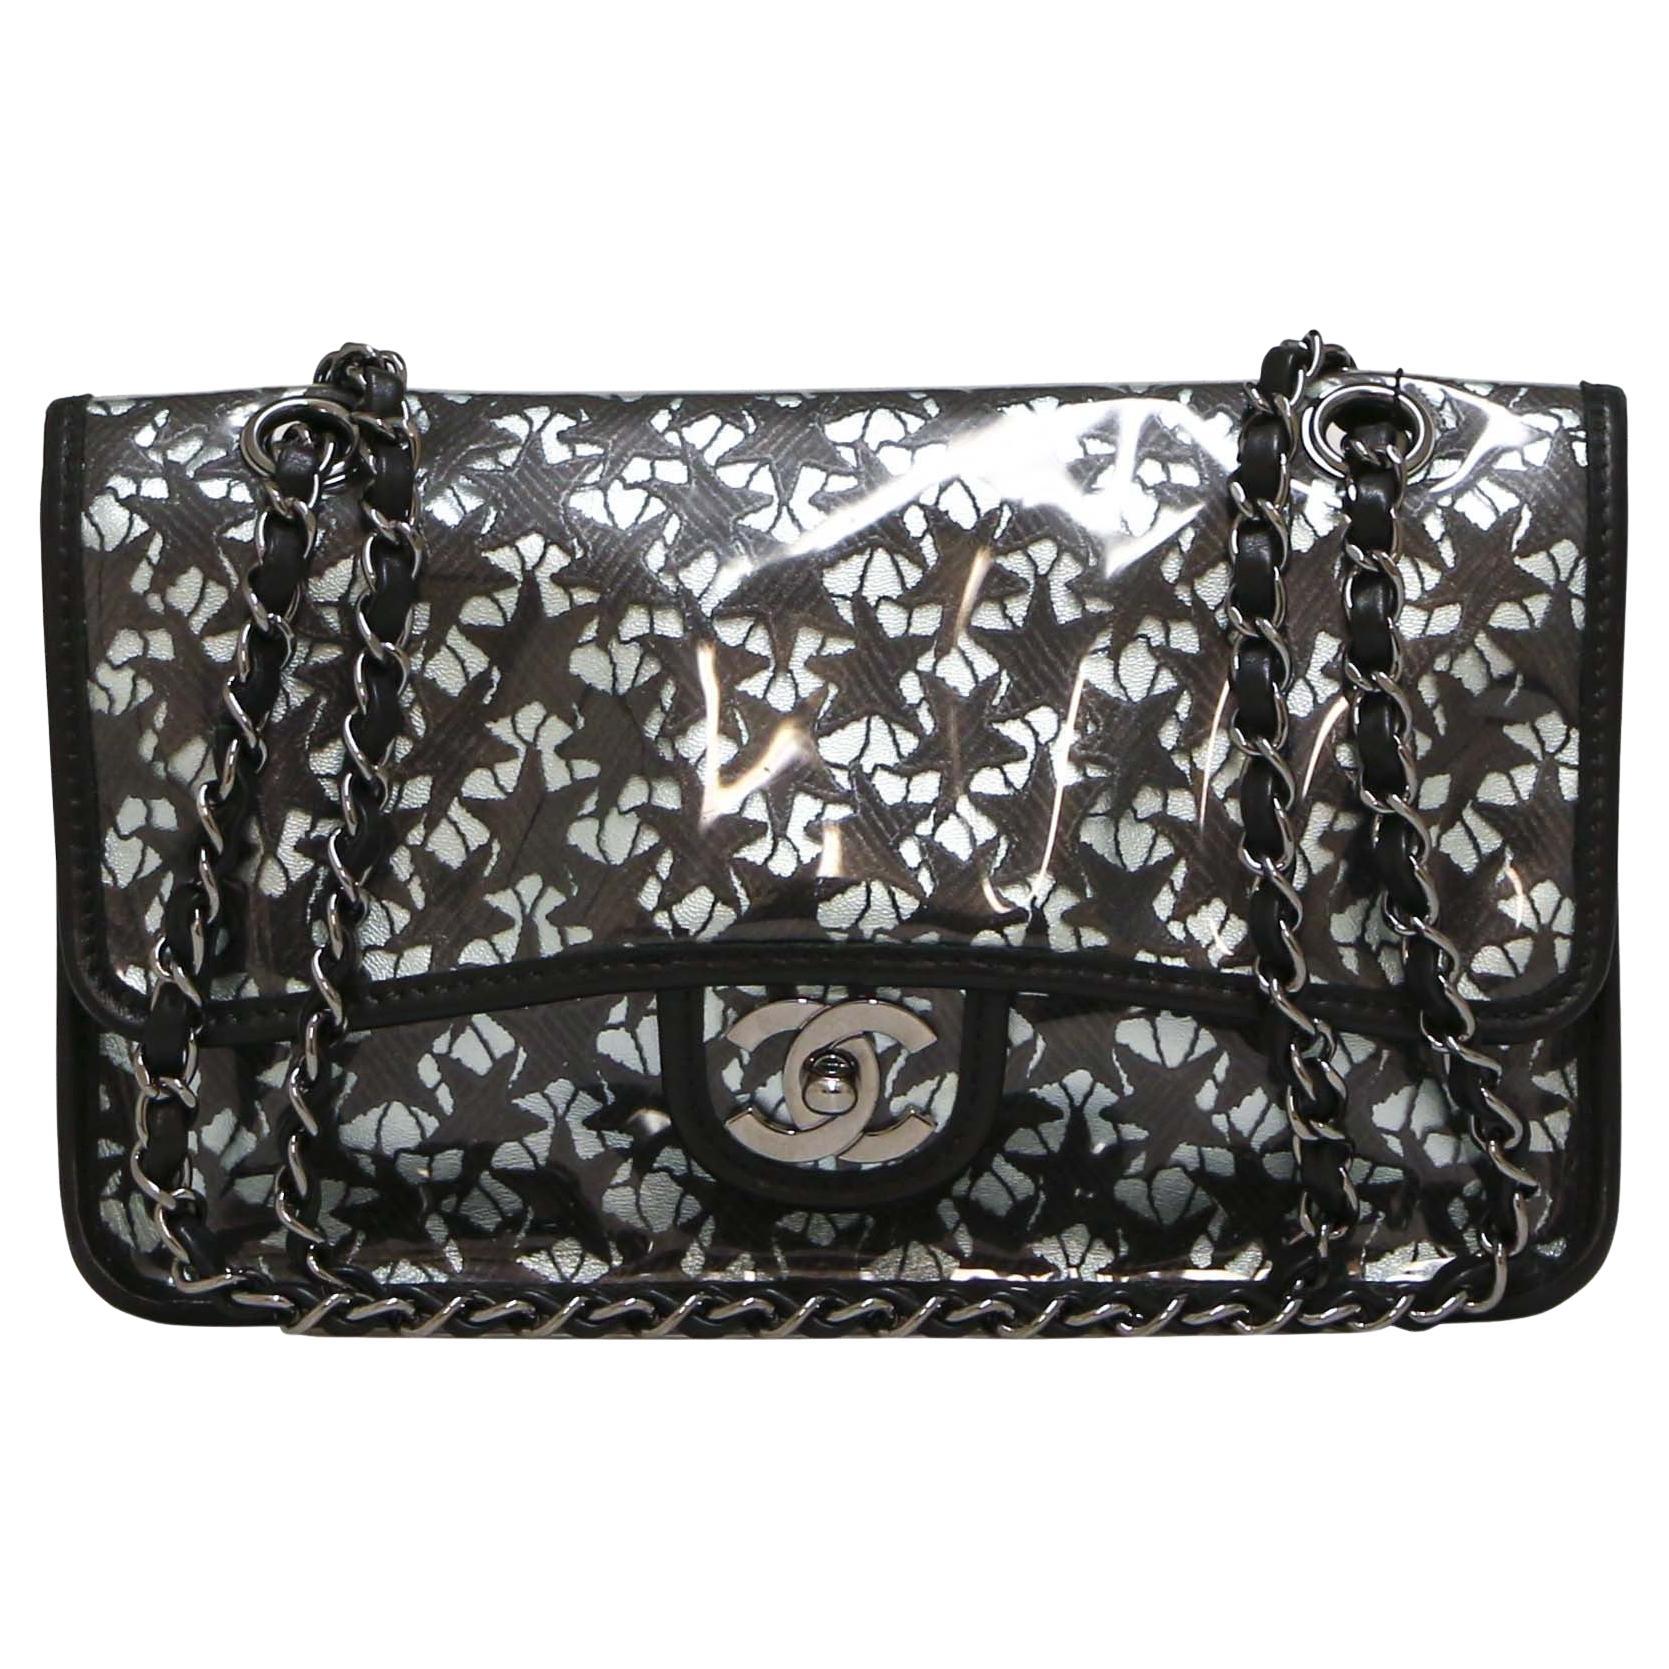 CHANEL Timeless bag in transparent PVC with black stars For Sale